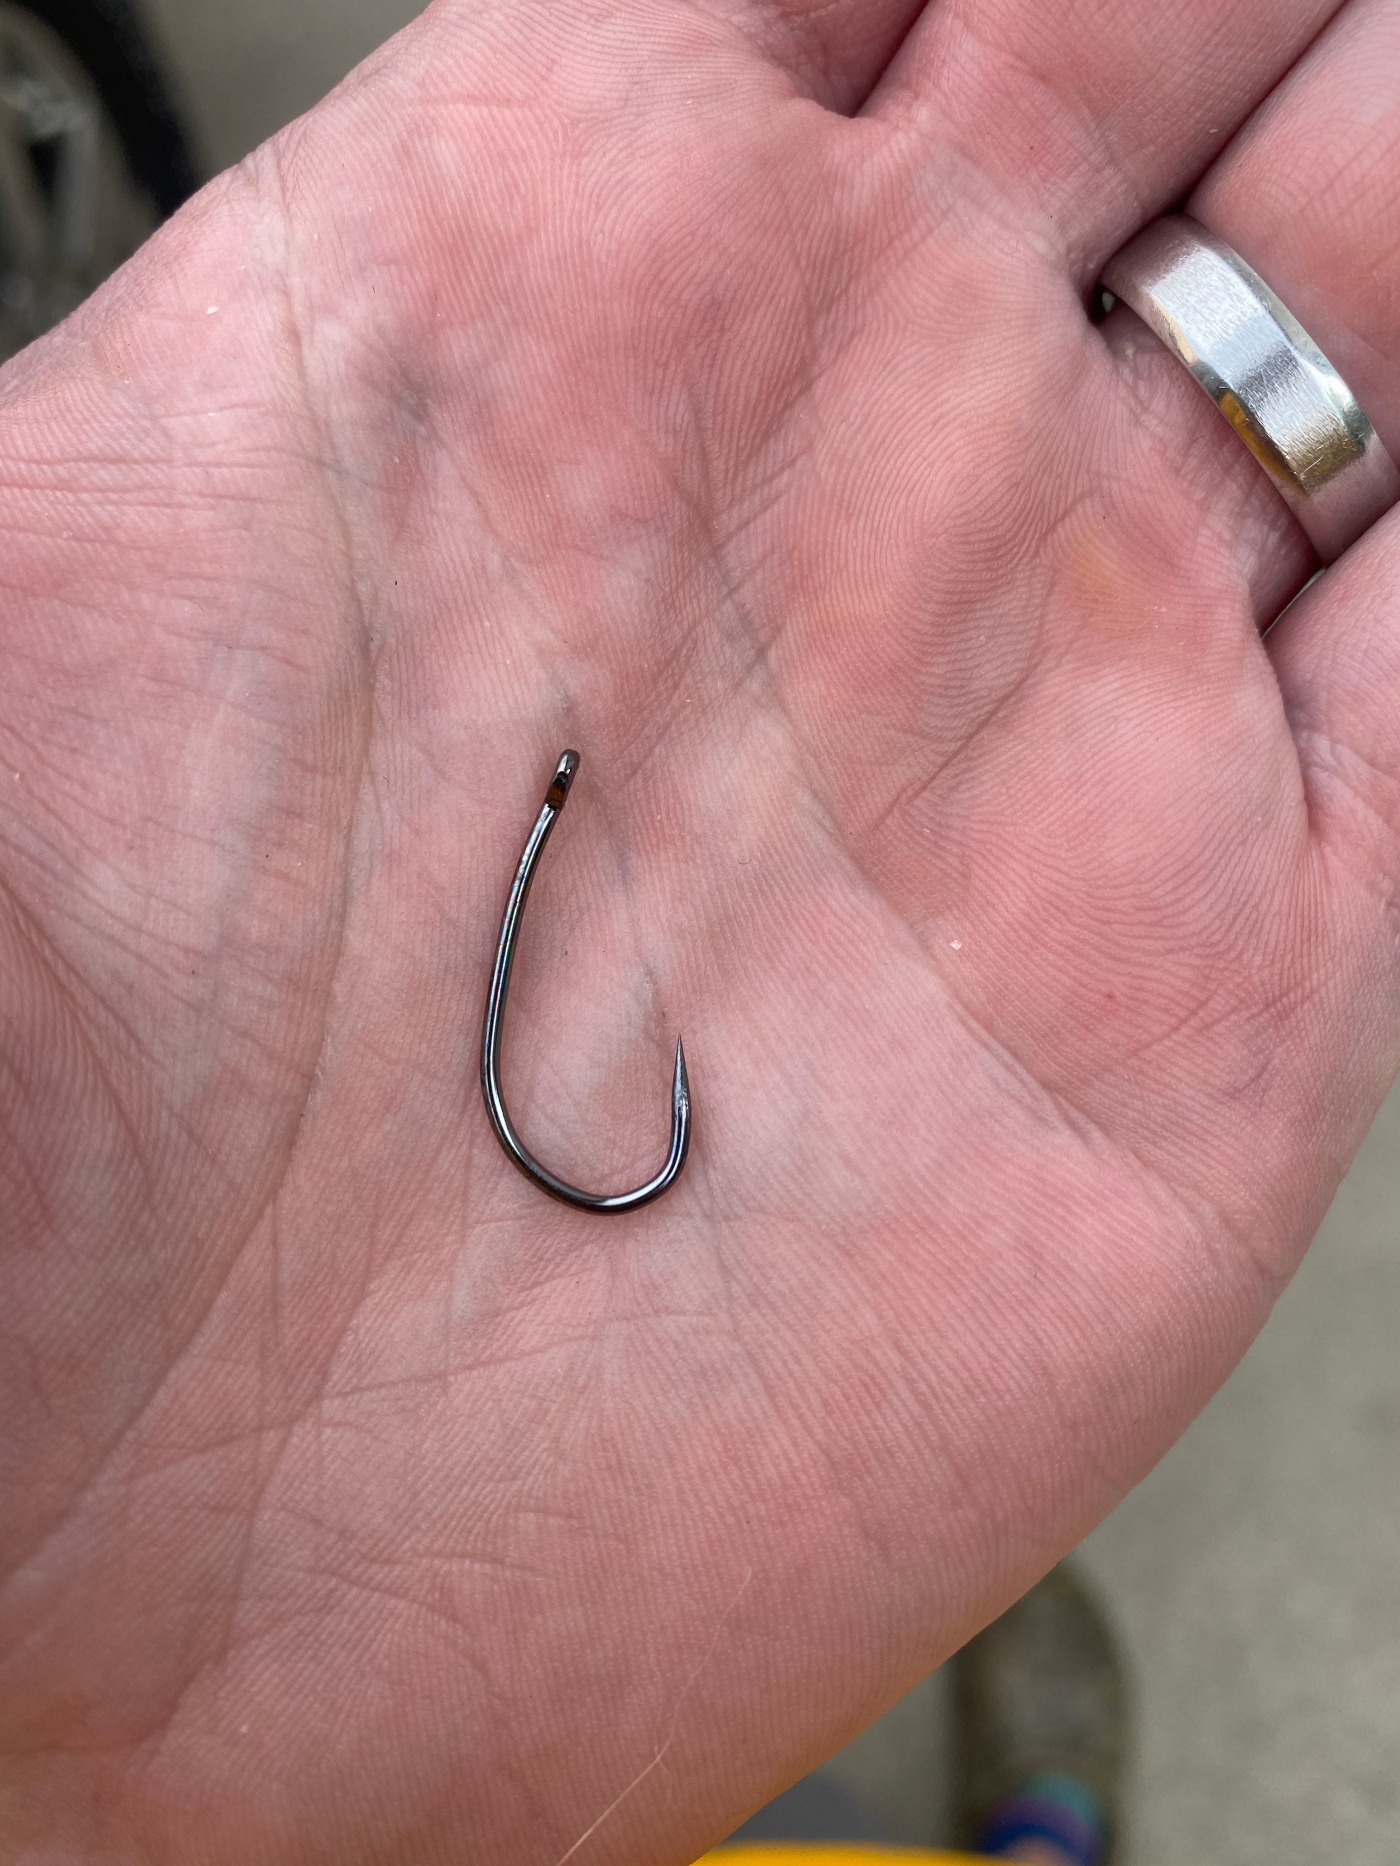 BARBED or BARBLESS HOOKS? Barbless catch MORE FISH! 